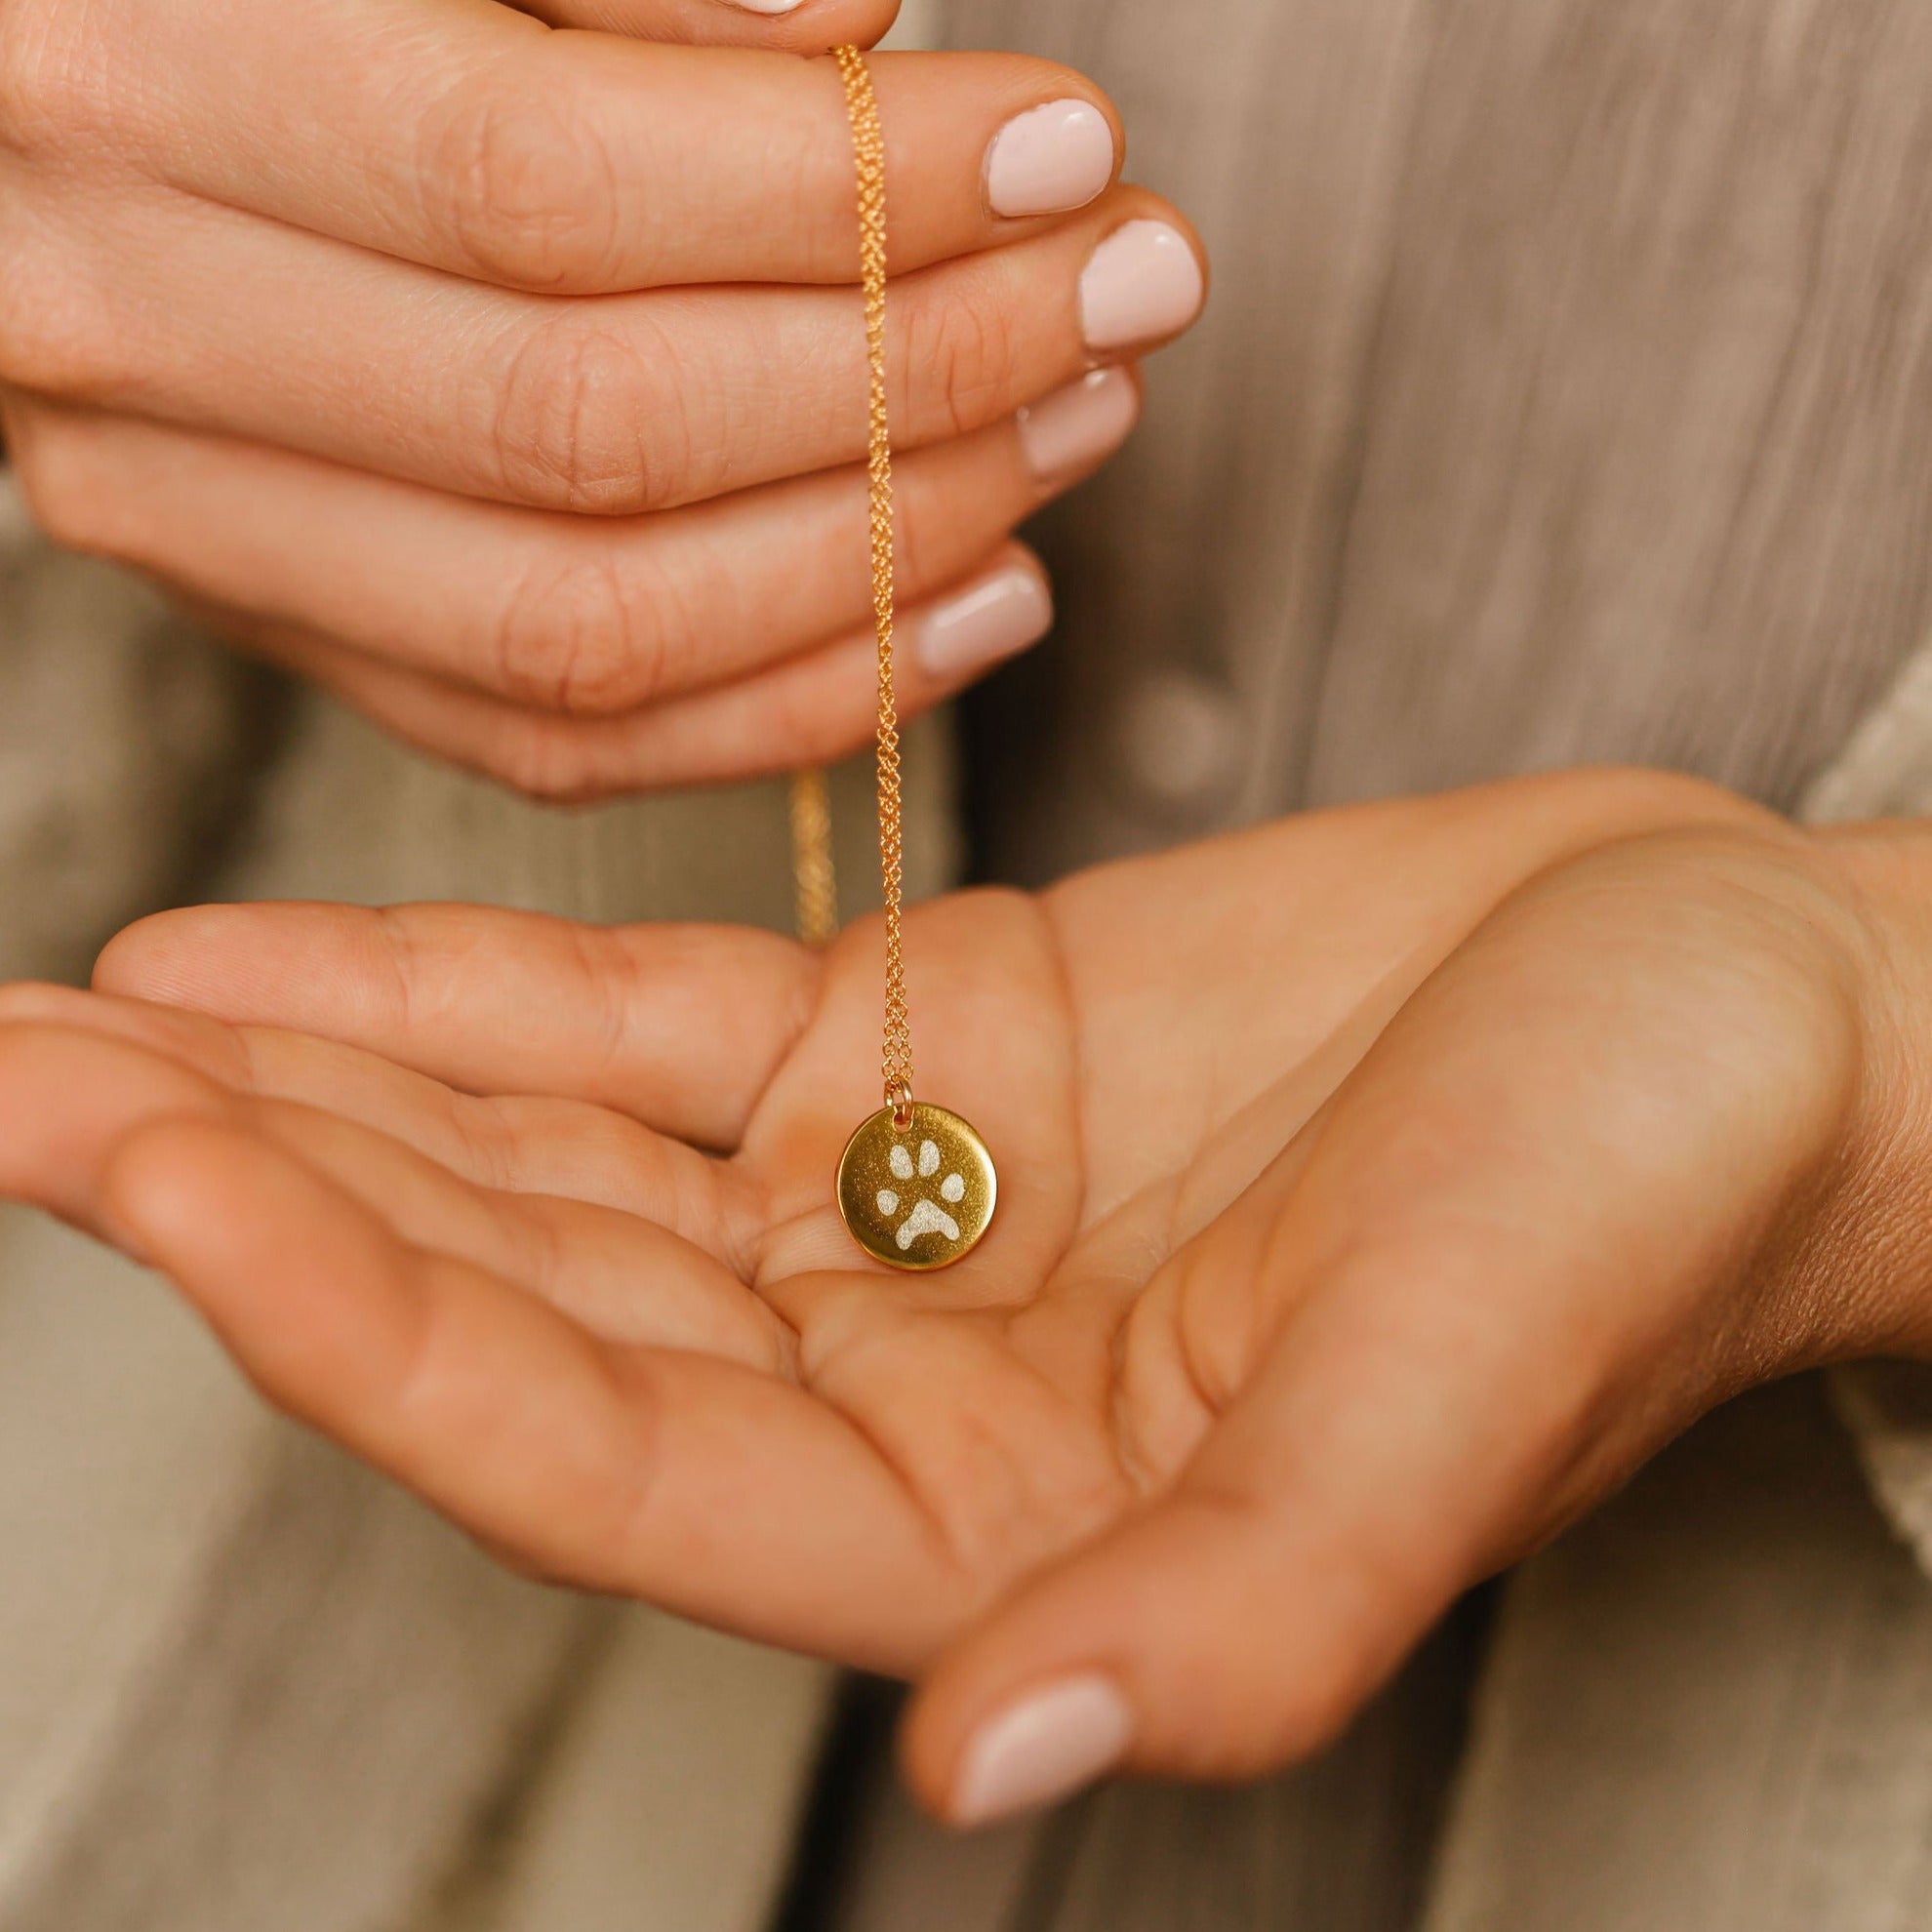 A women holding a paw print coin necklace made from actual pet prints